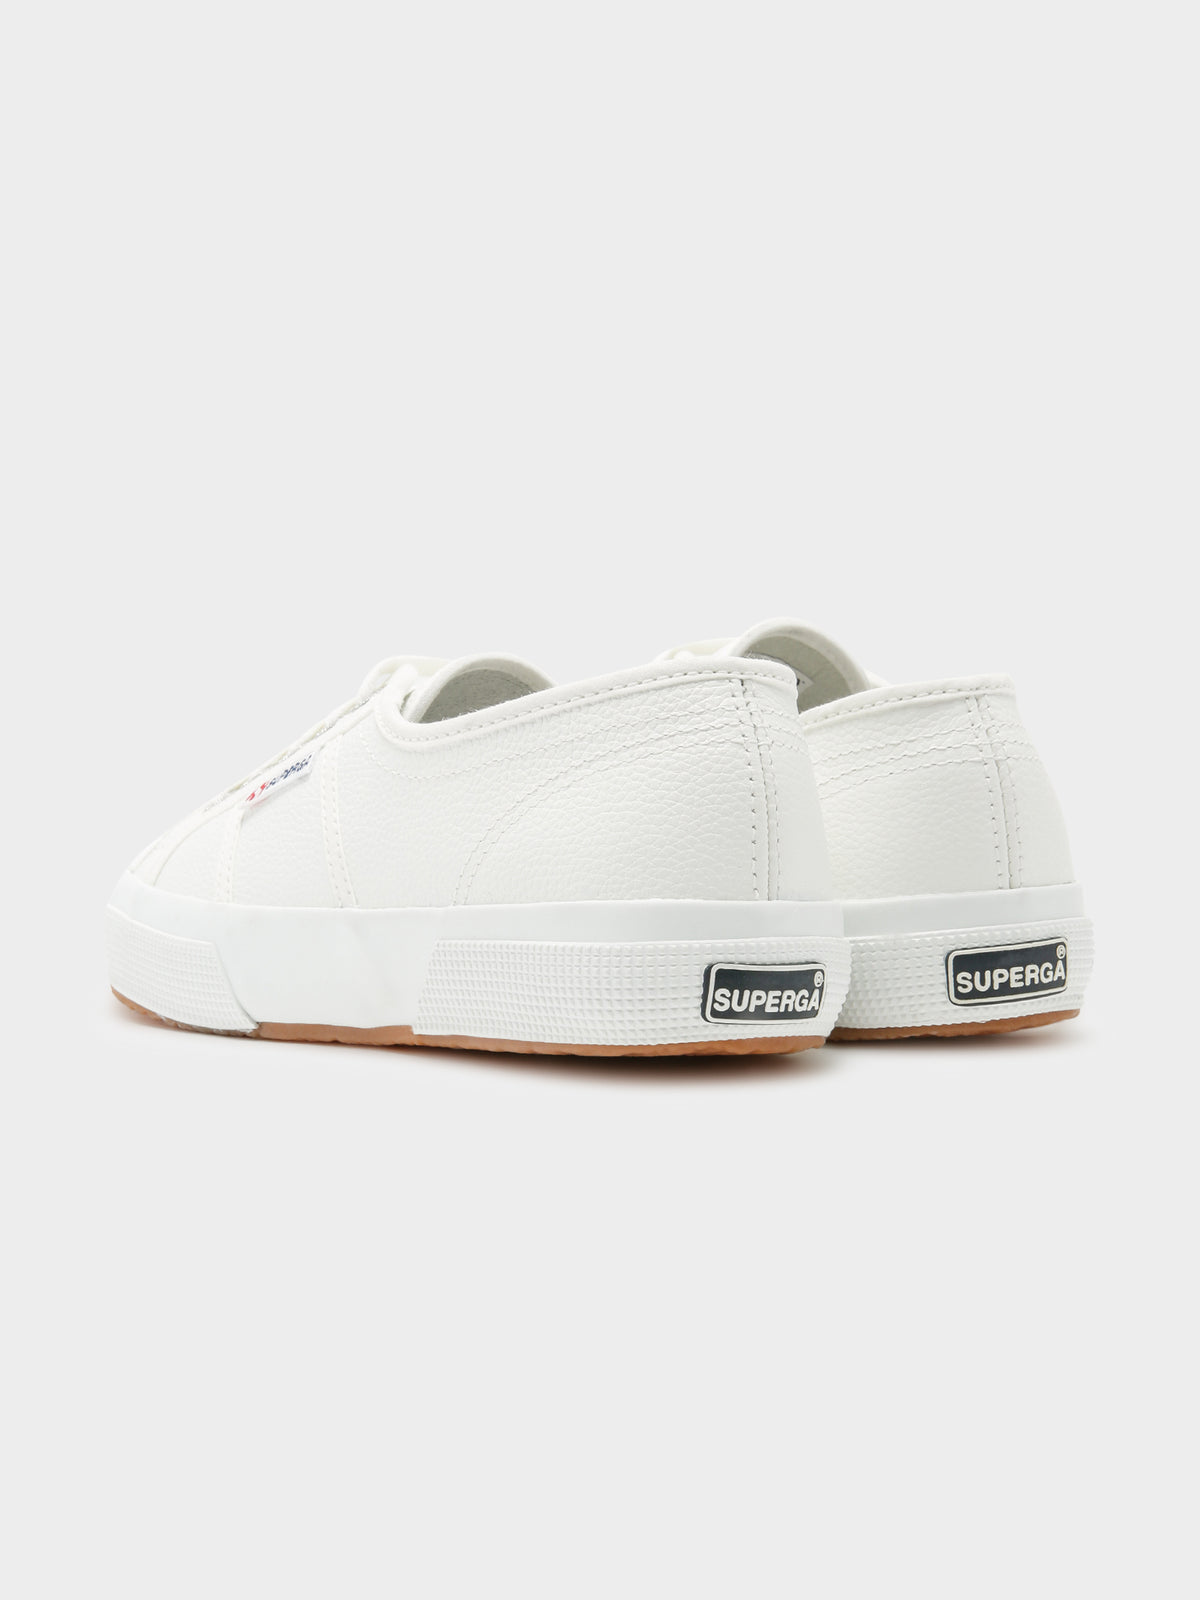 Unisex 2750 Cotu Classic Sneakers in White Leather